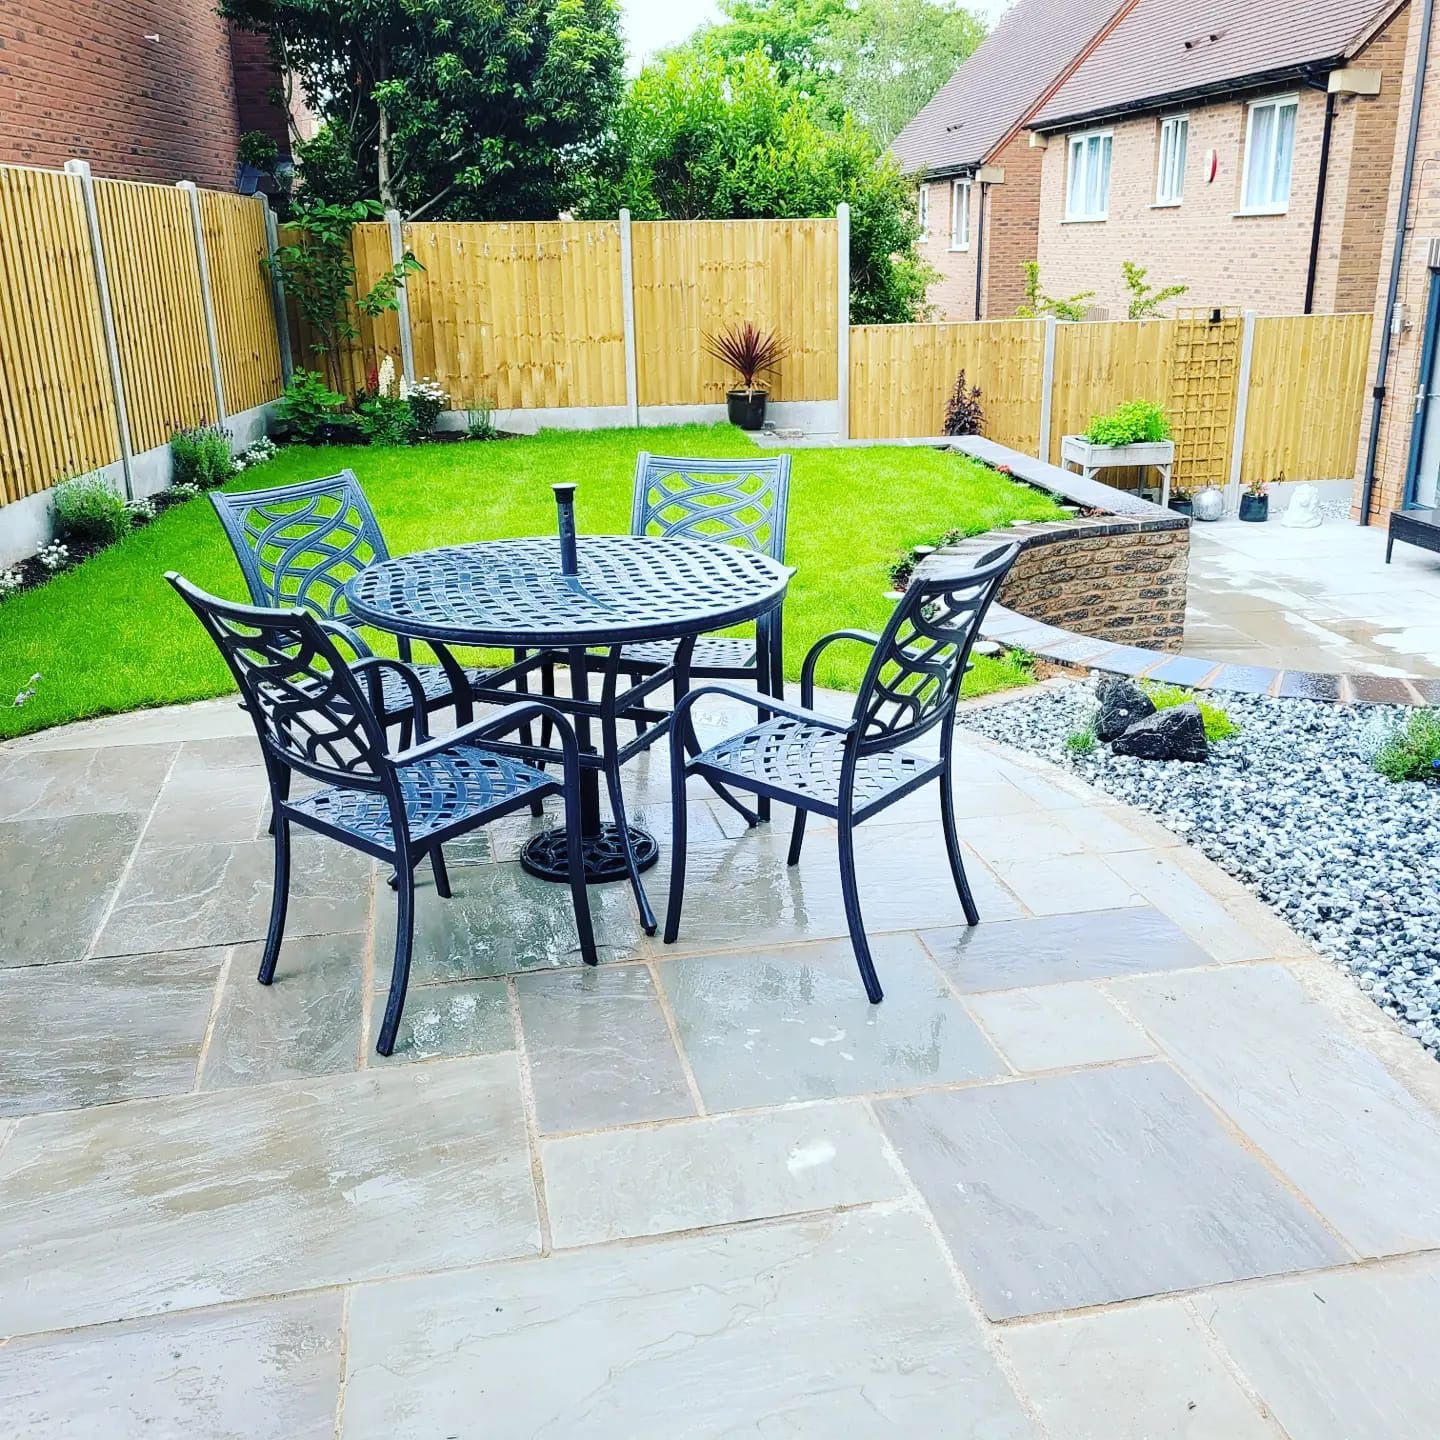 DNA Landscapes Dunchurch landscaping project